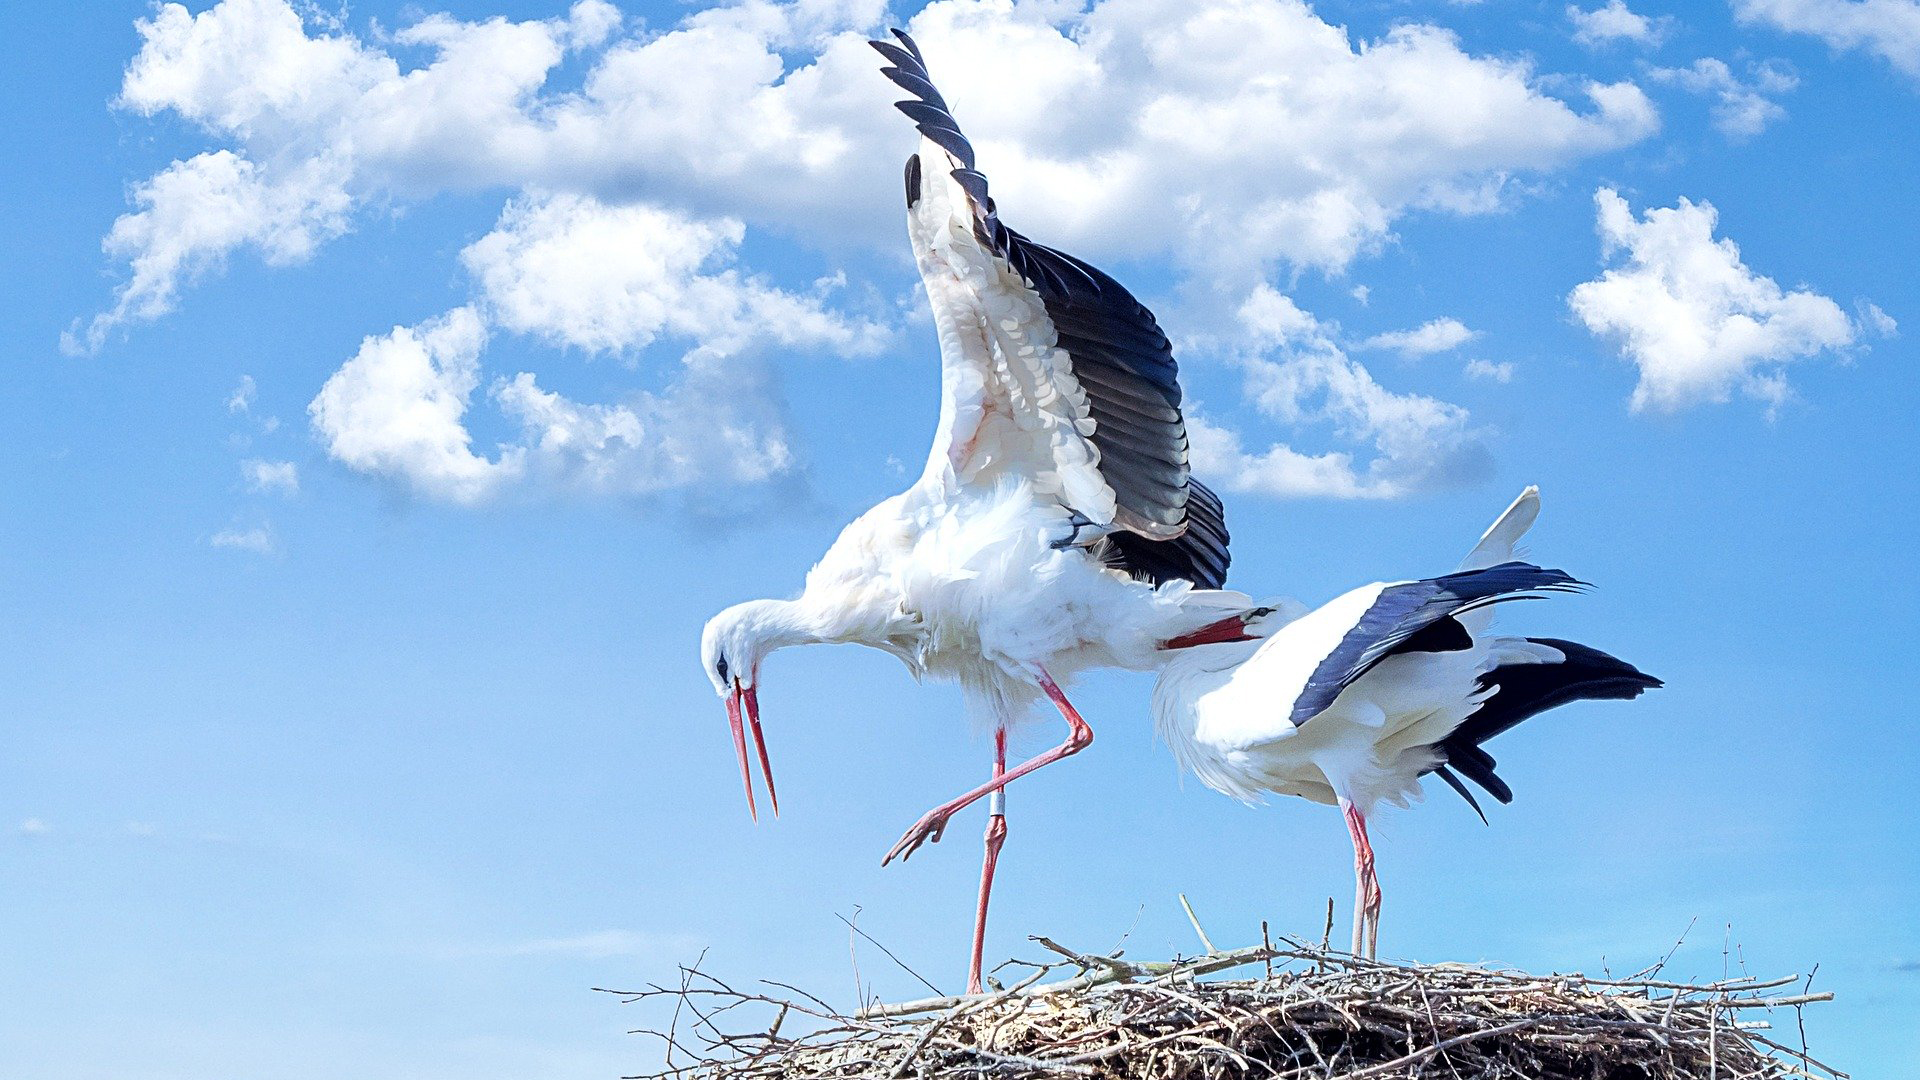 In spring, there are storks!